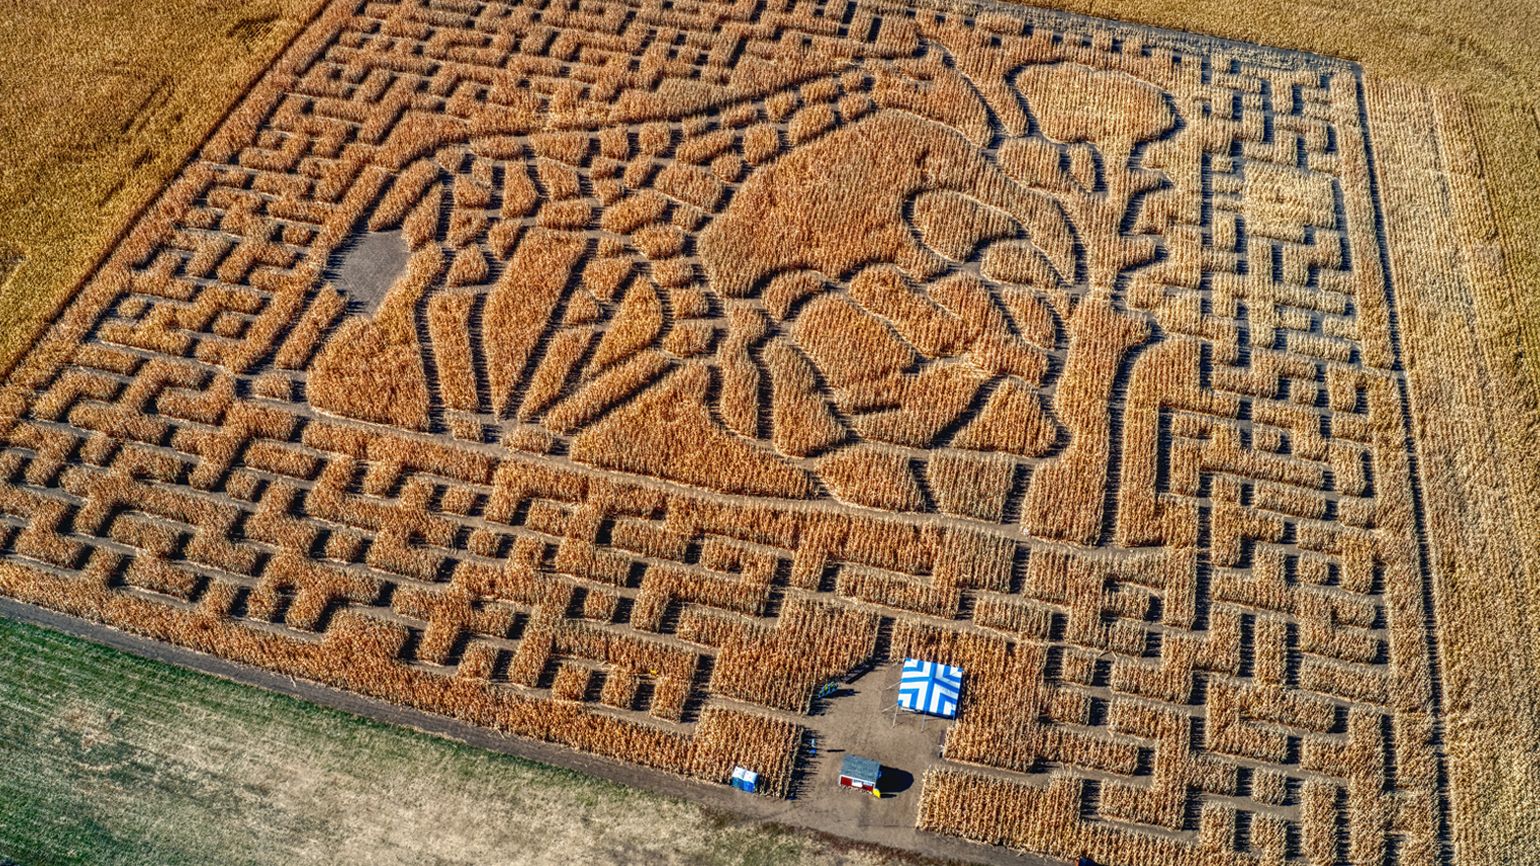 Aerial View of a Corn Maze outside of Sioux Falls, South Dakota. Credit: Shutterstock